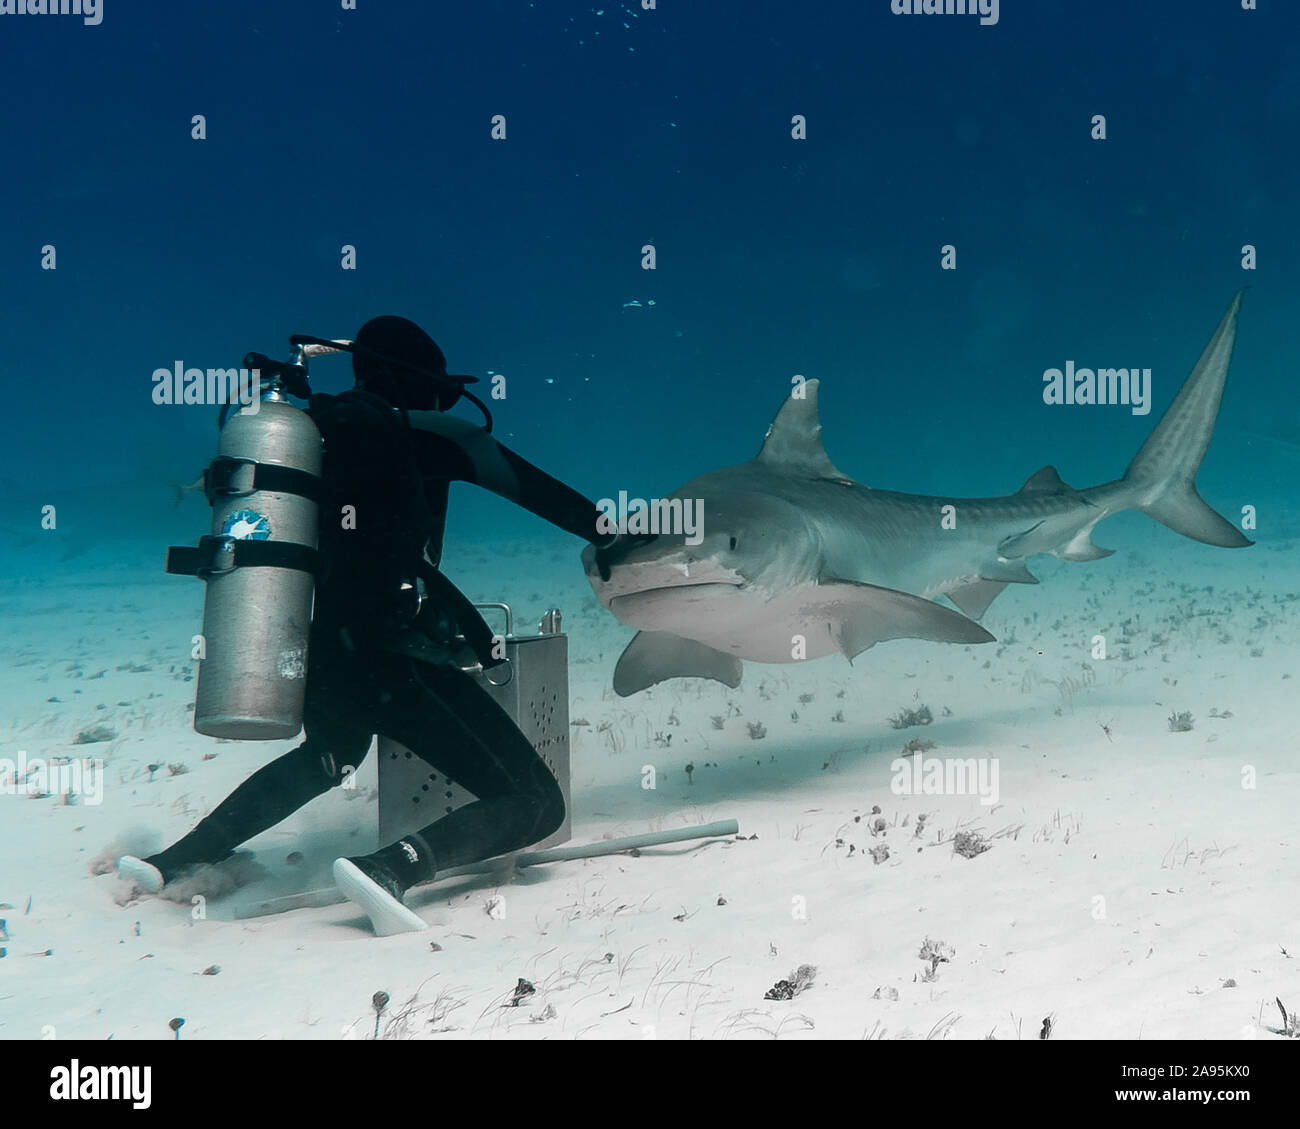 BAHAMAS: Easy! Roberta pushes the shark away as it explores the nearby bait box. INCREDIBLE photos show a courageous shark feeder getting up close and Stock Photo